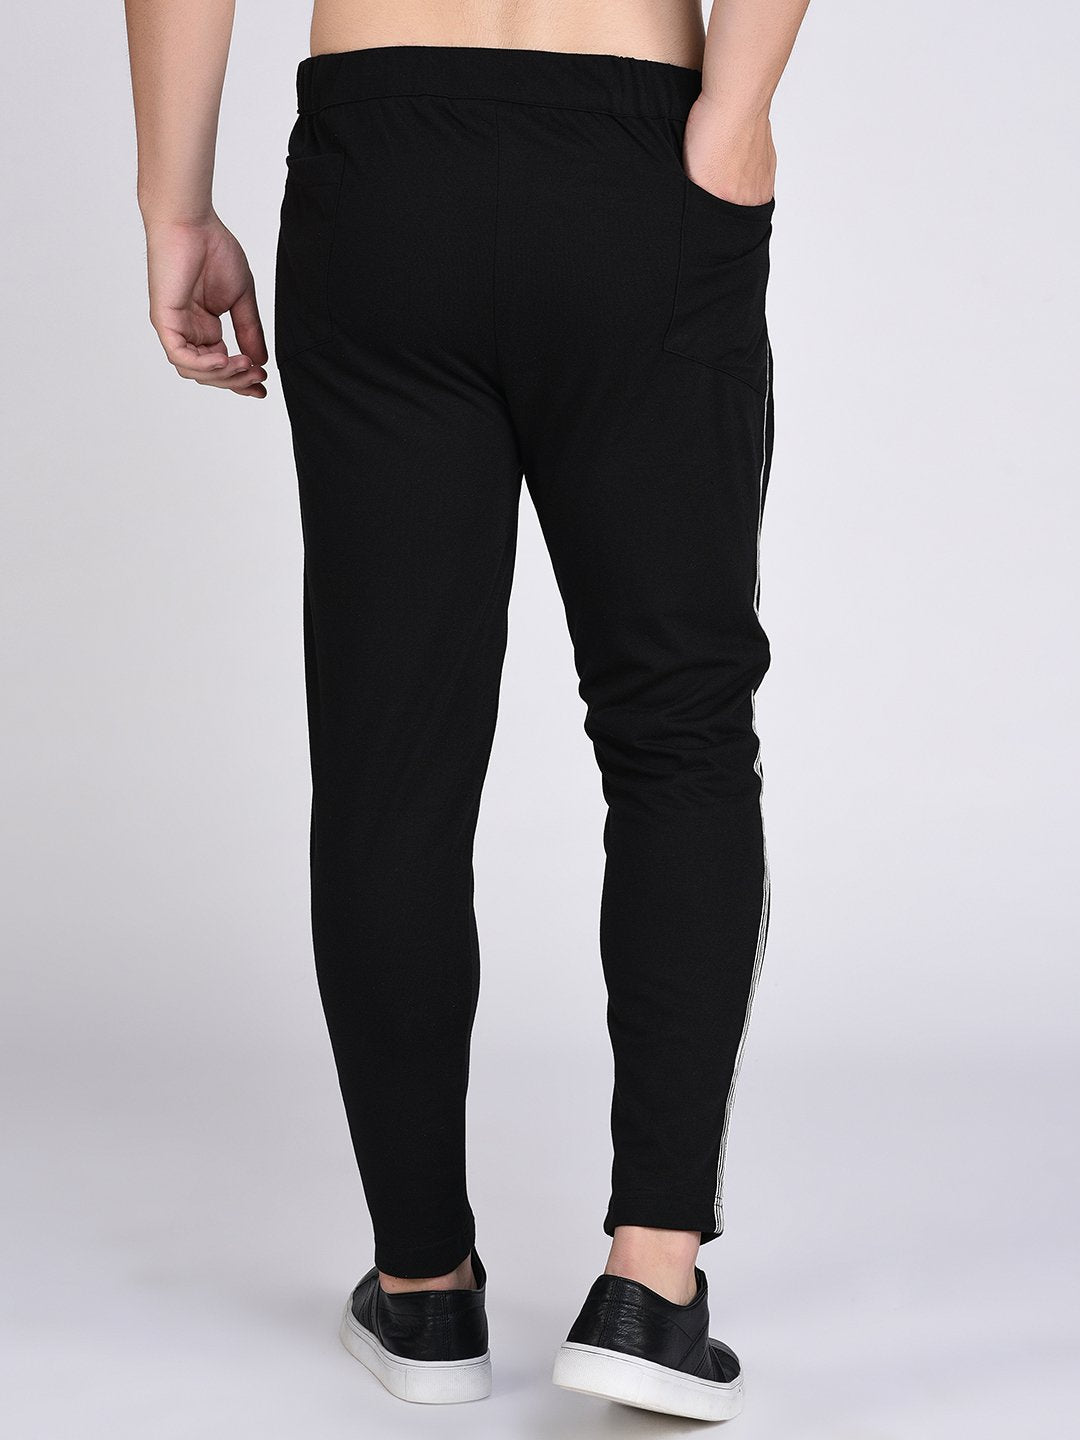 Trendy Pant Type Track Pant Lower Black Color